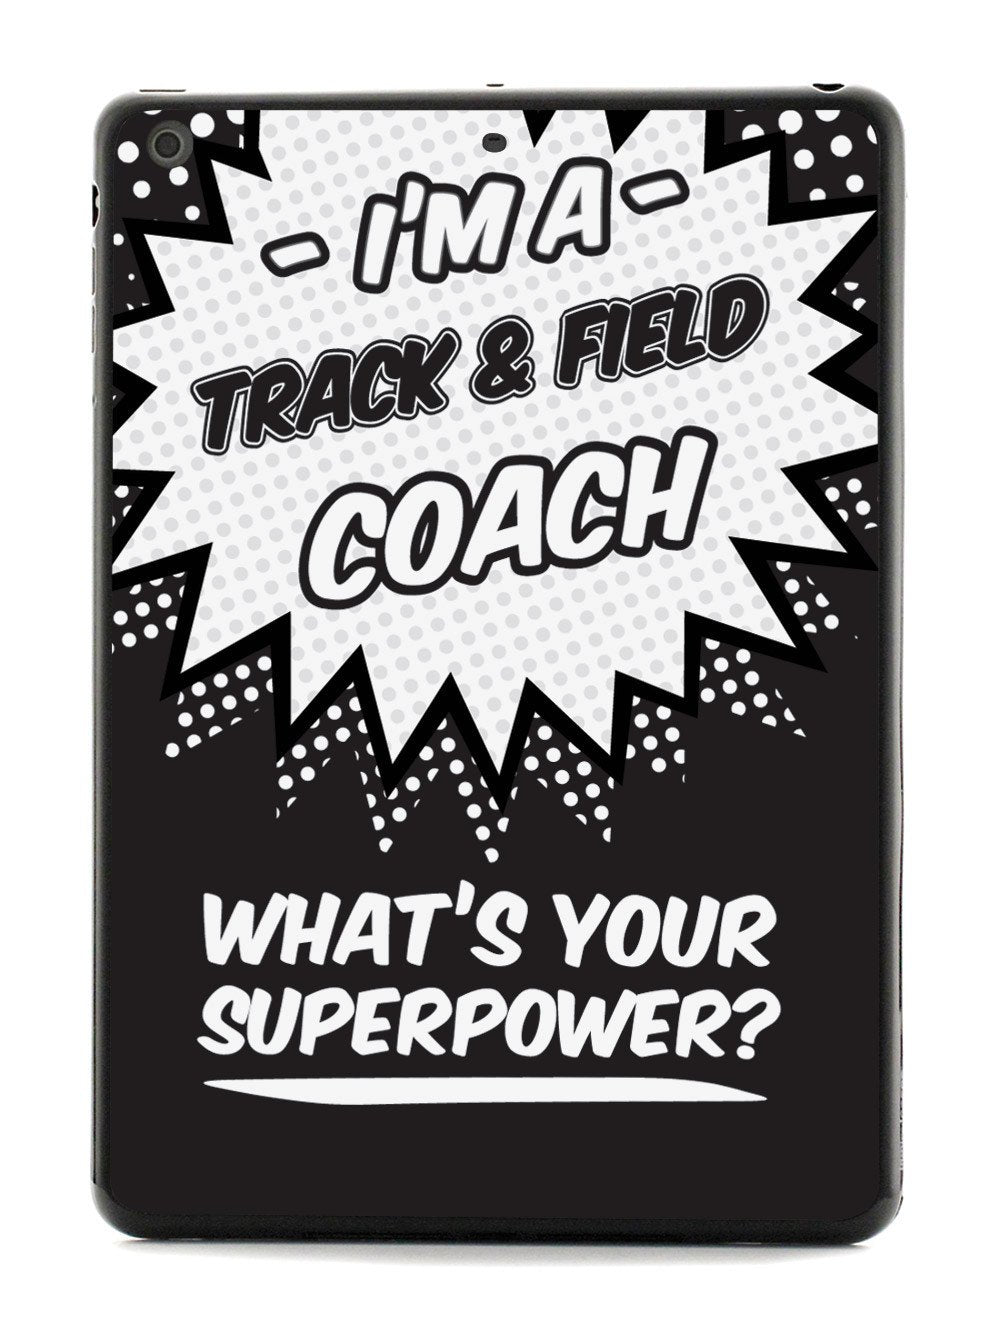 Track & Field Coach - What's Your Superpower? Case